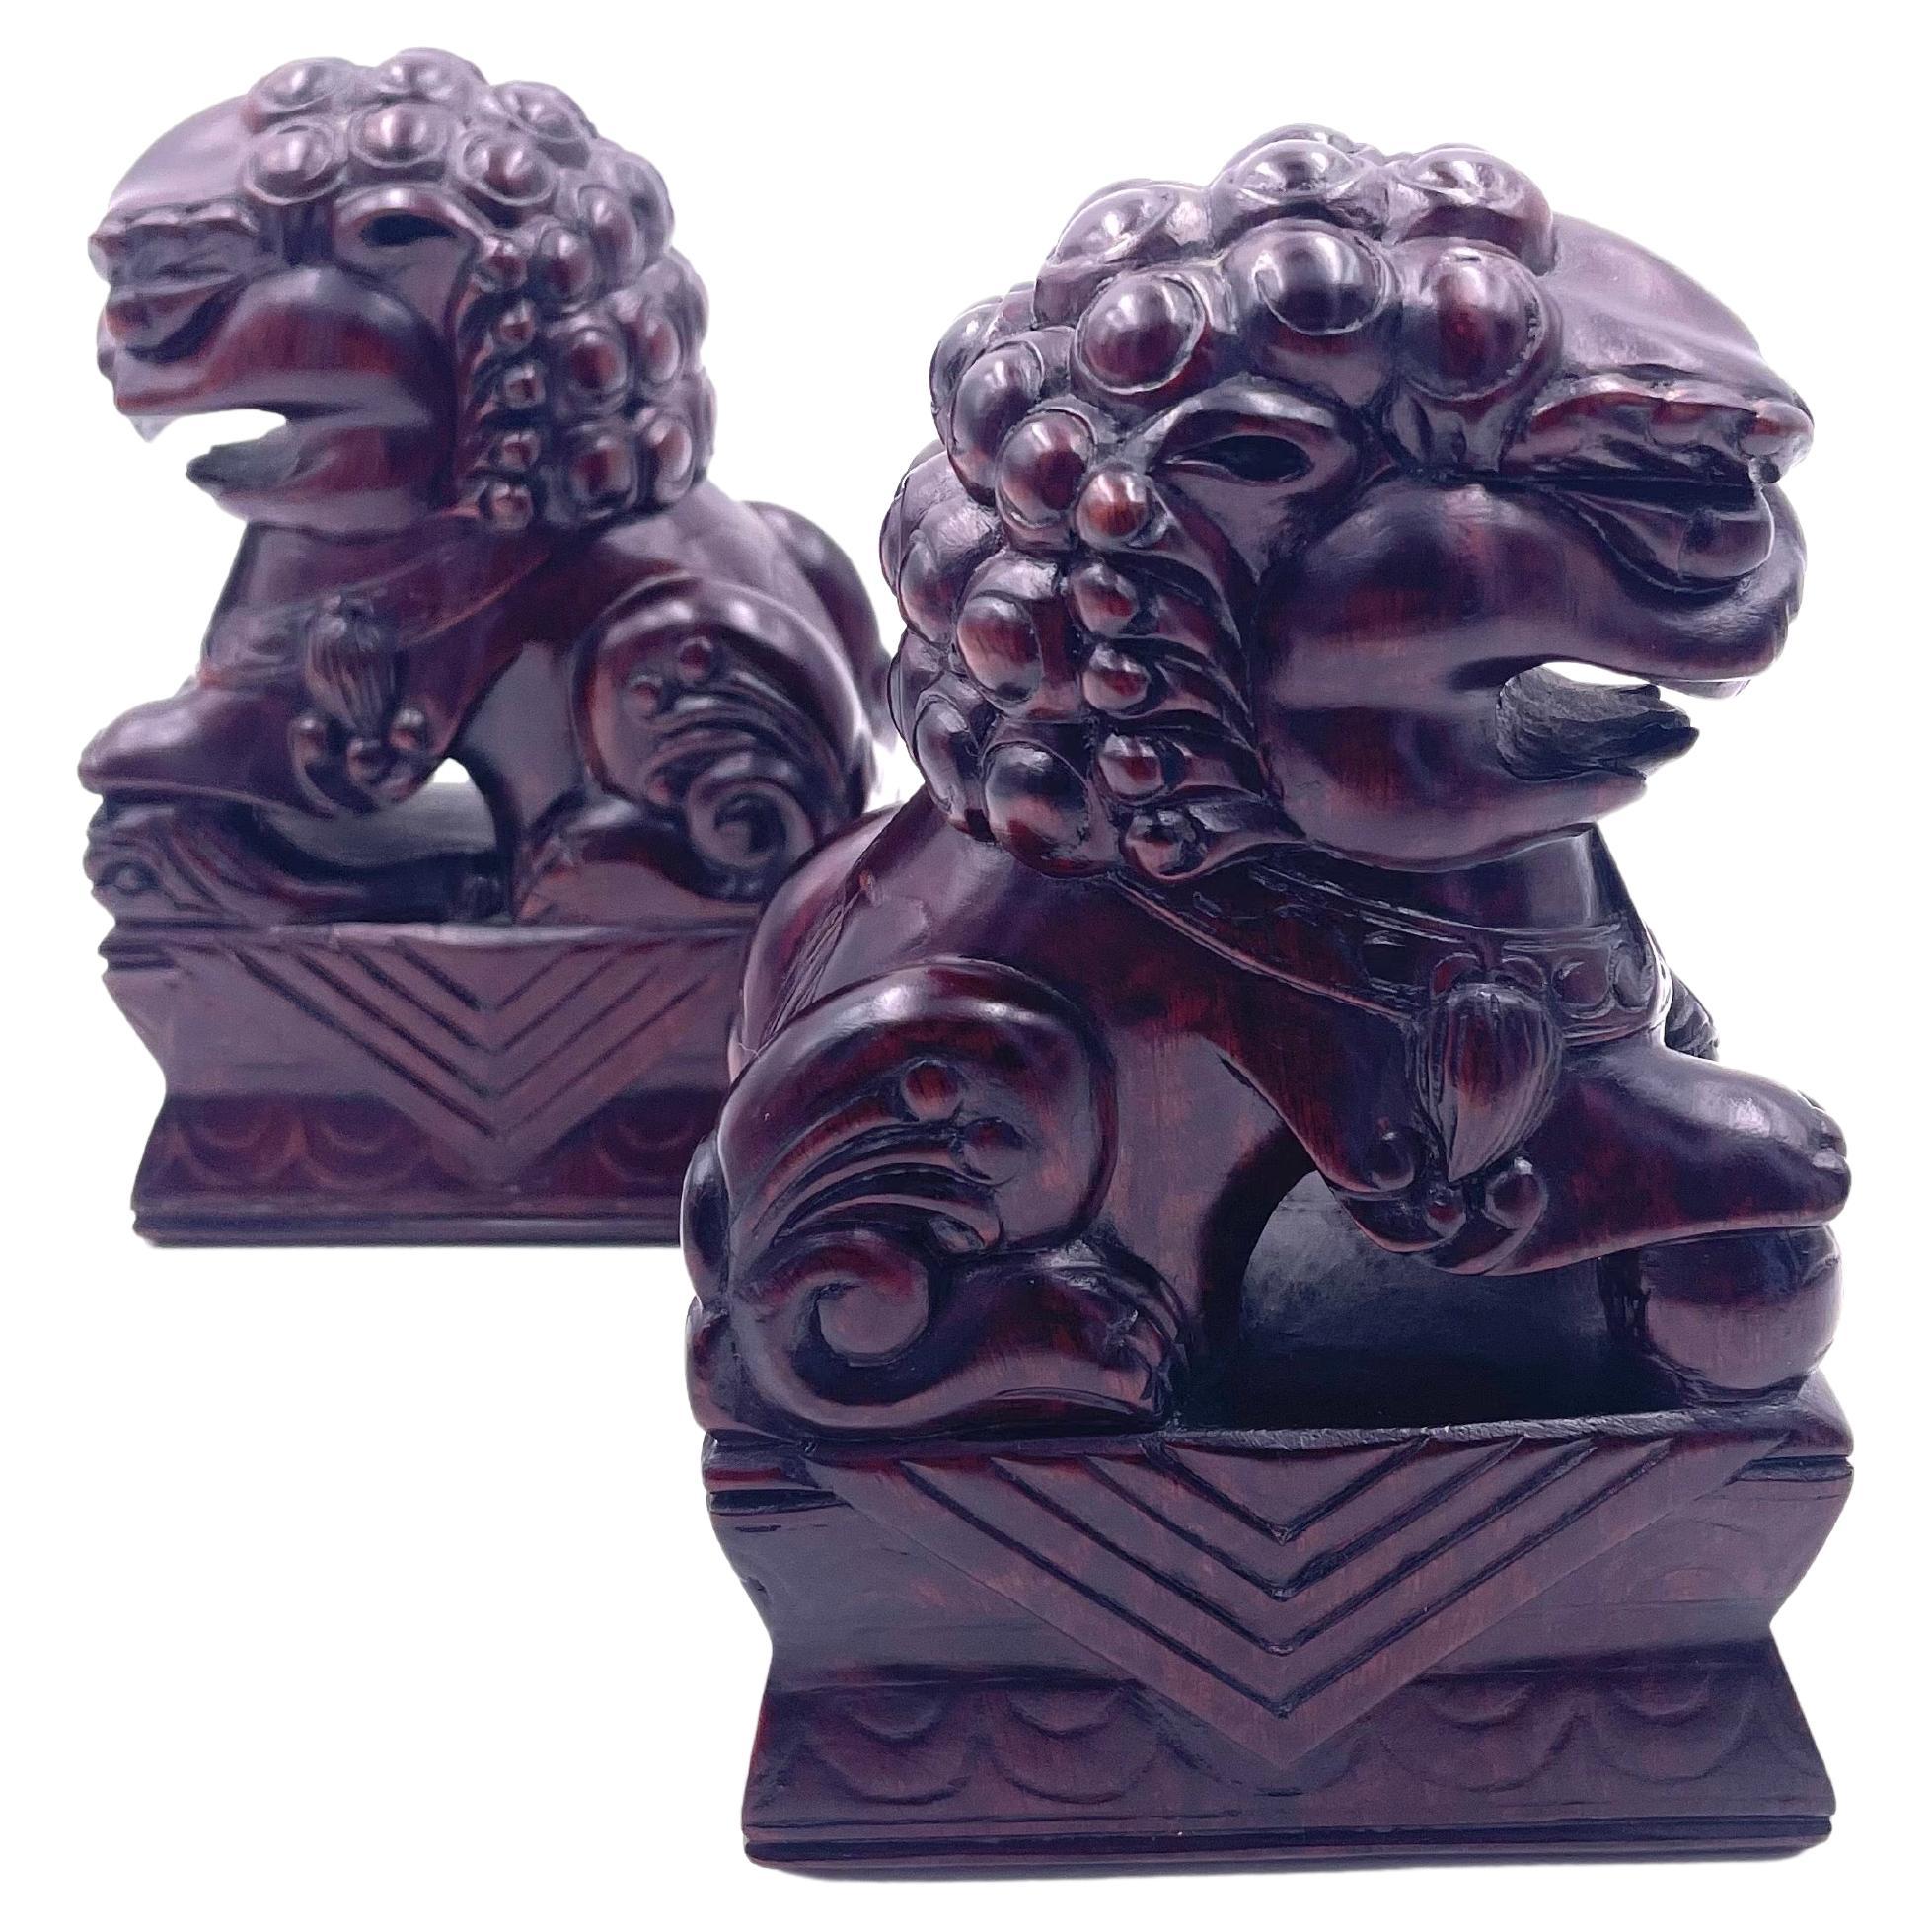 A very nice pair of vintage, rosewood carved foo dogs from Japan. Excellent condition and patina; makes a fun decor item in any room!